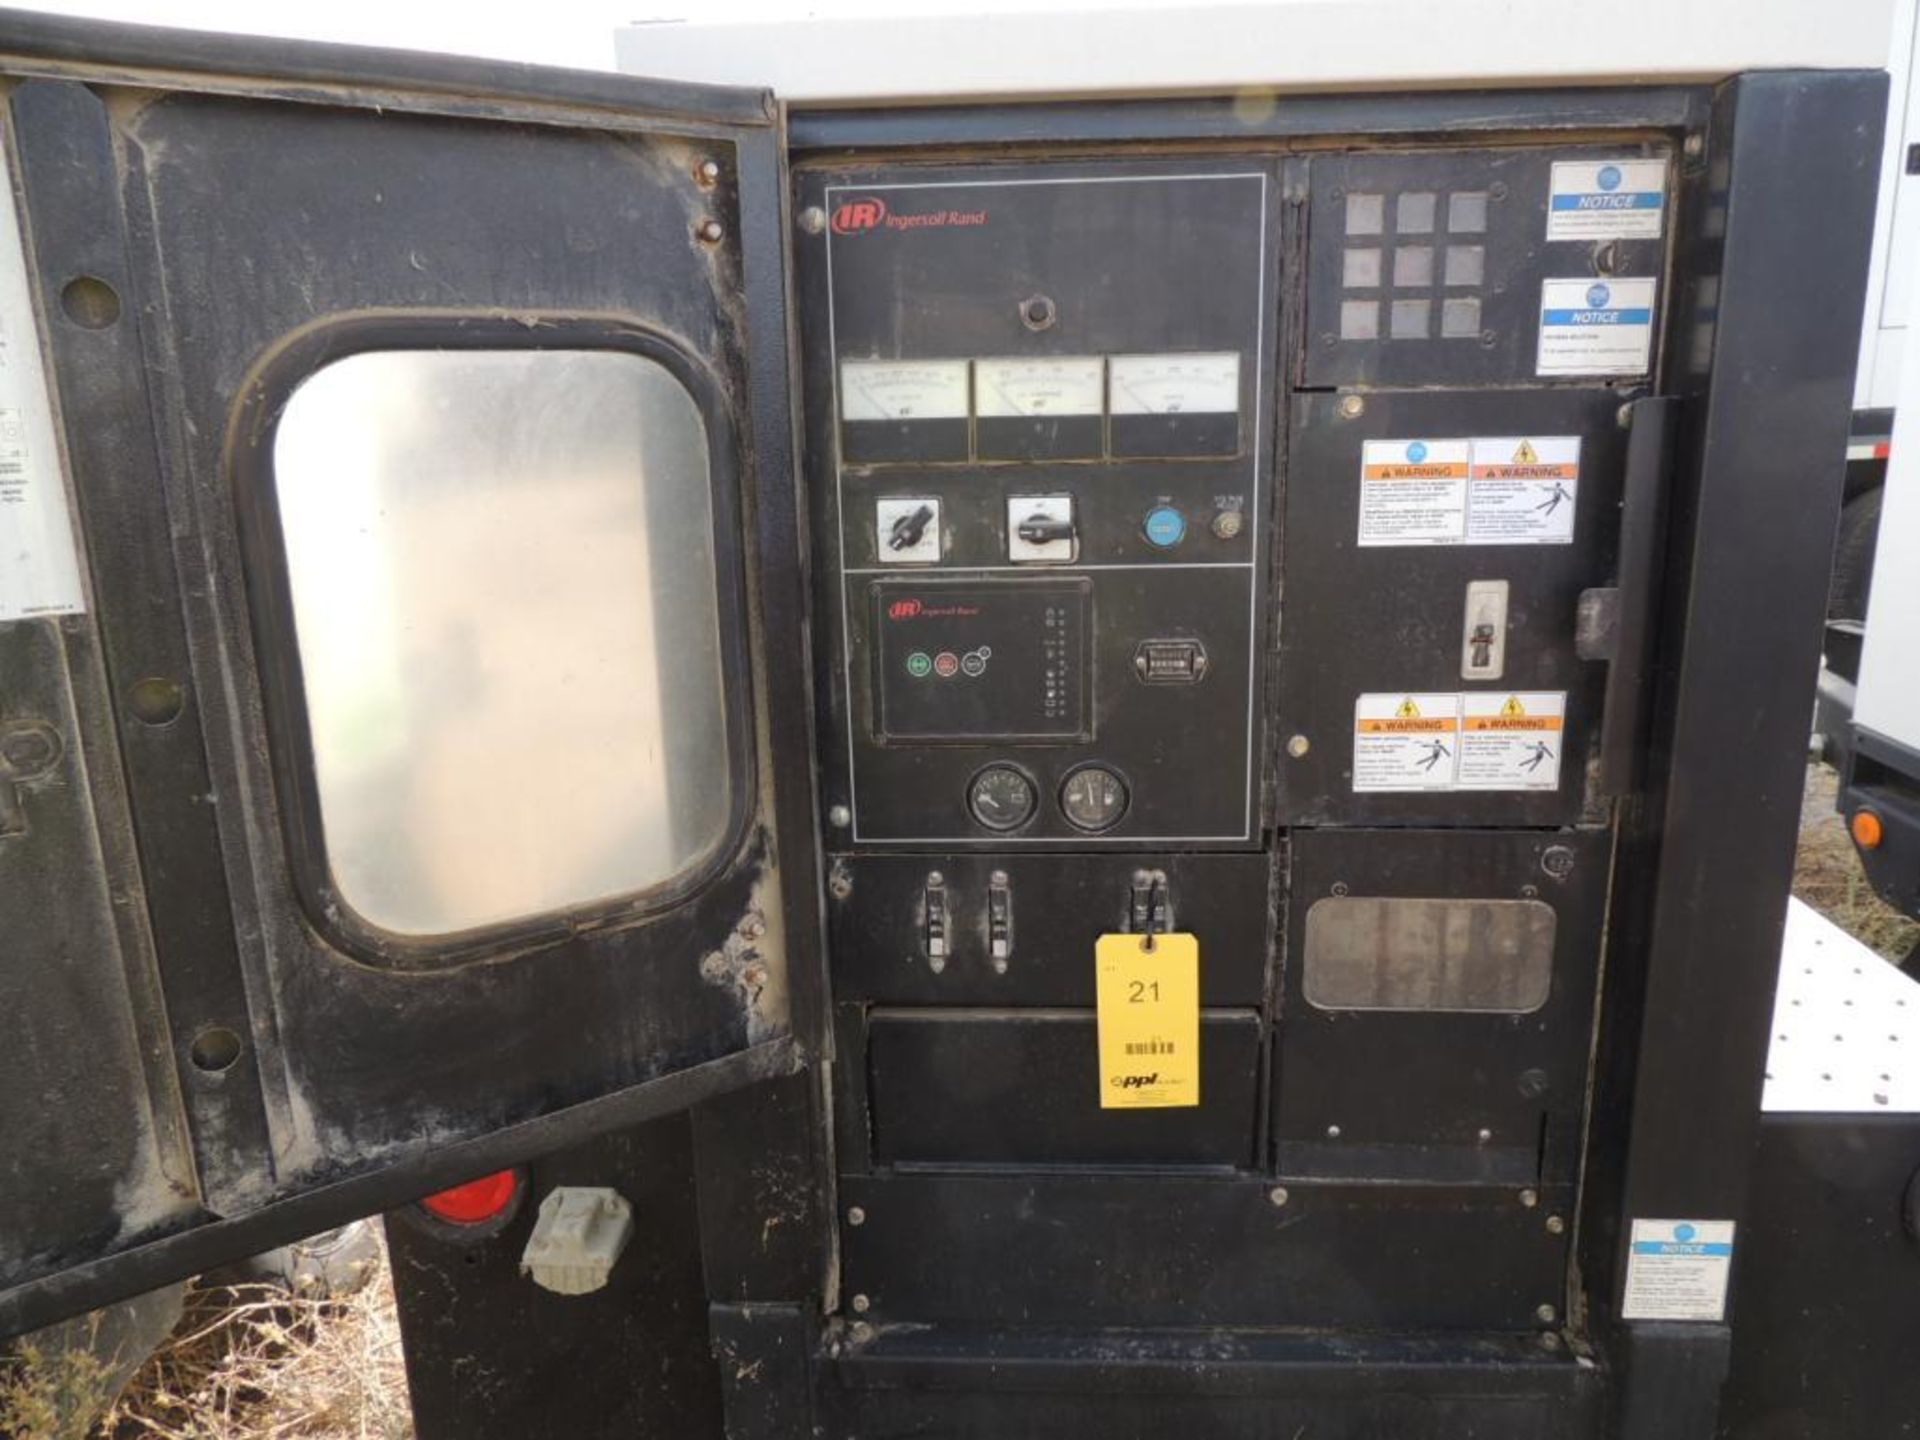 **NO TITLE** 2010 DOOSAN GENERATOR G25 MODEL G25WMI-2A-T41, S/N 417275UHUD61, 24,672 INDICATED HOURS - Image 3 of 3